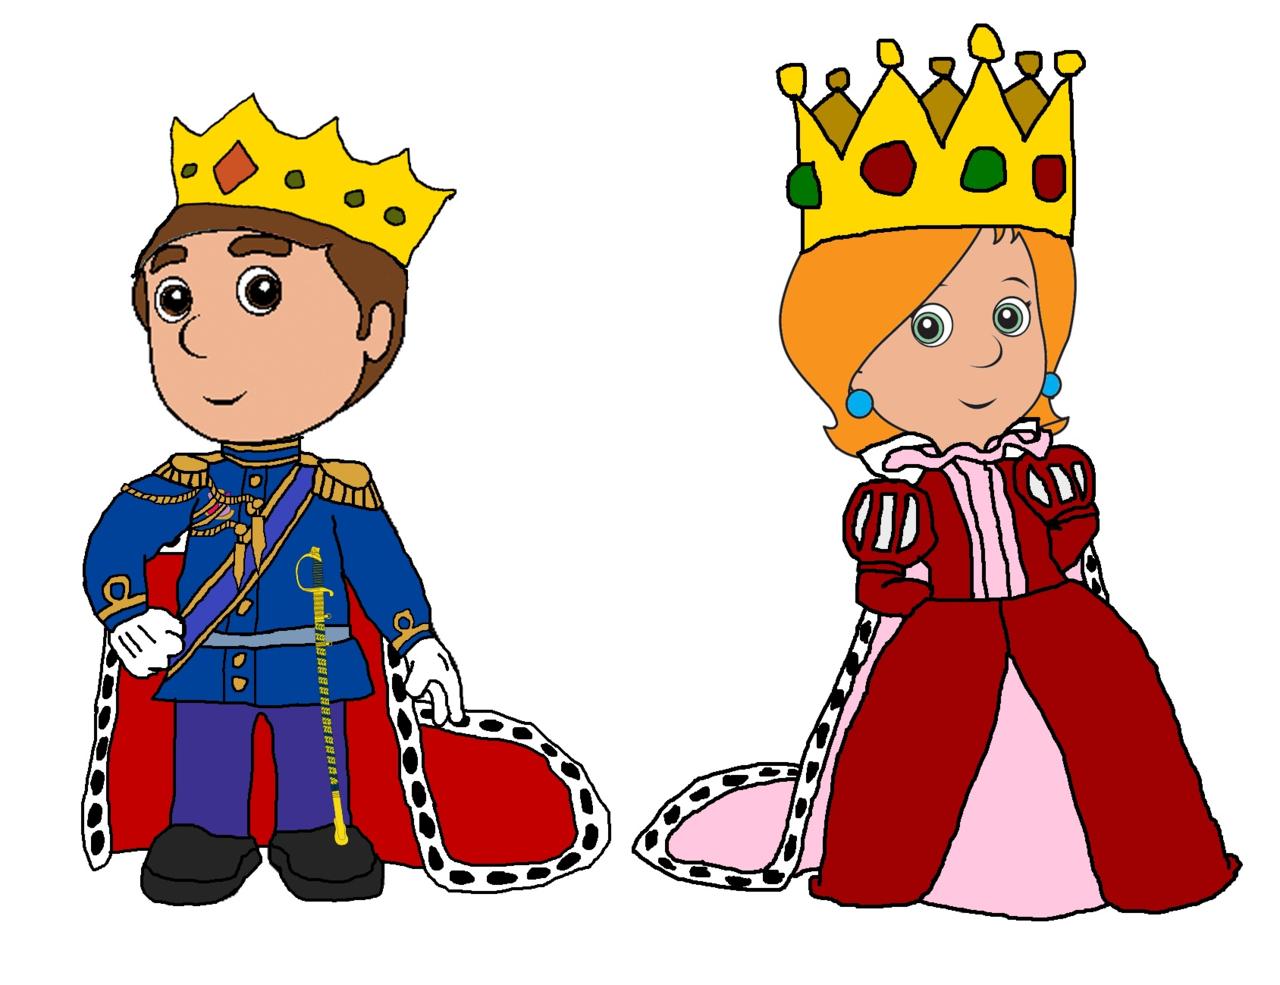 King and Queen- Dave123321 and Allicrombie